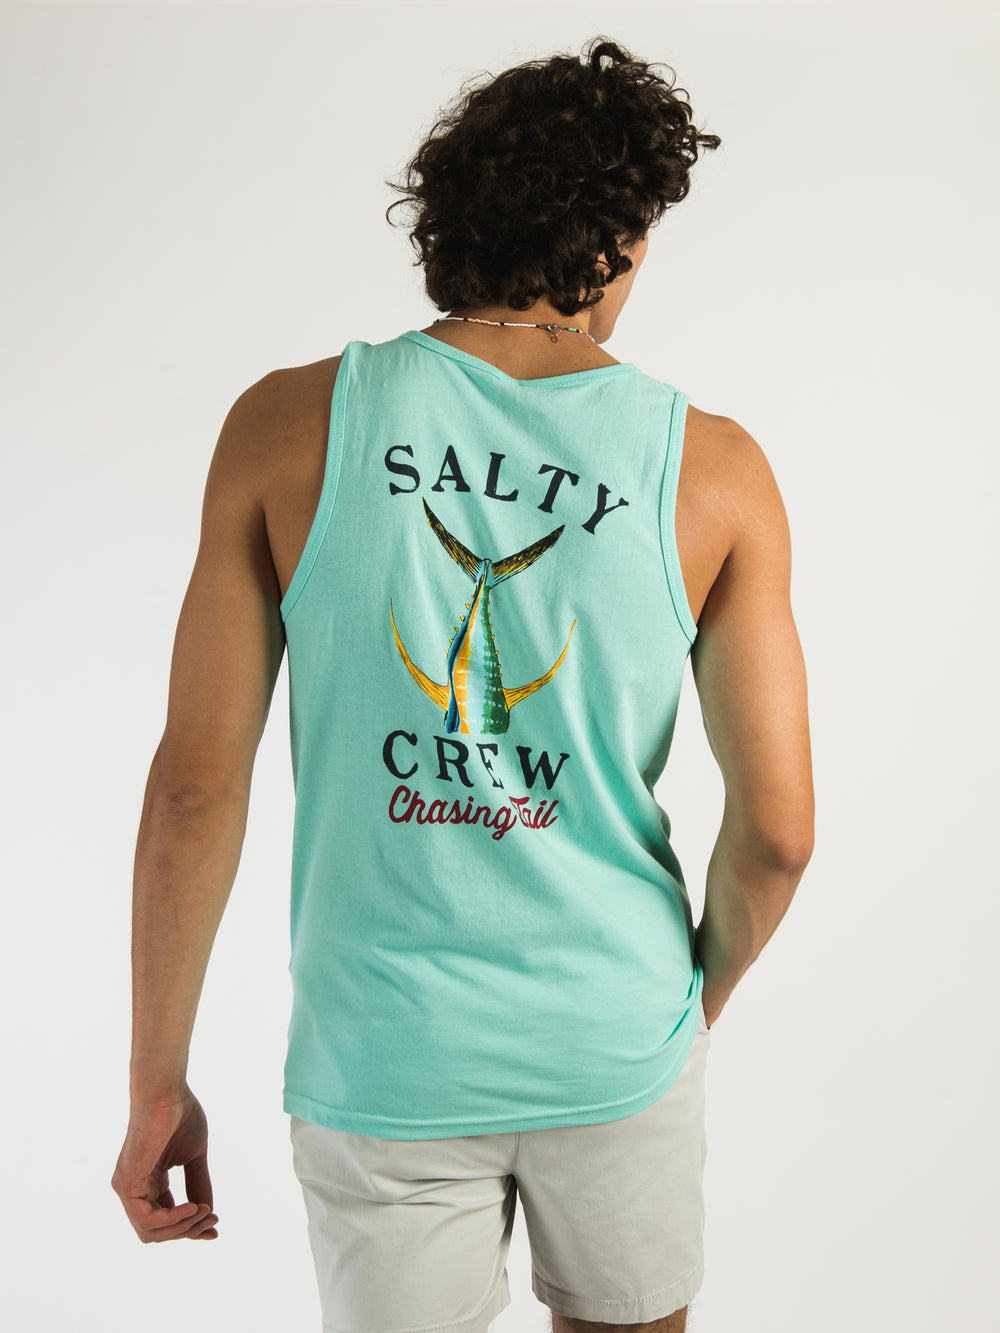 SALTY CREW TAILED TANK - CLEARANCE